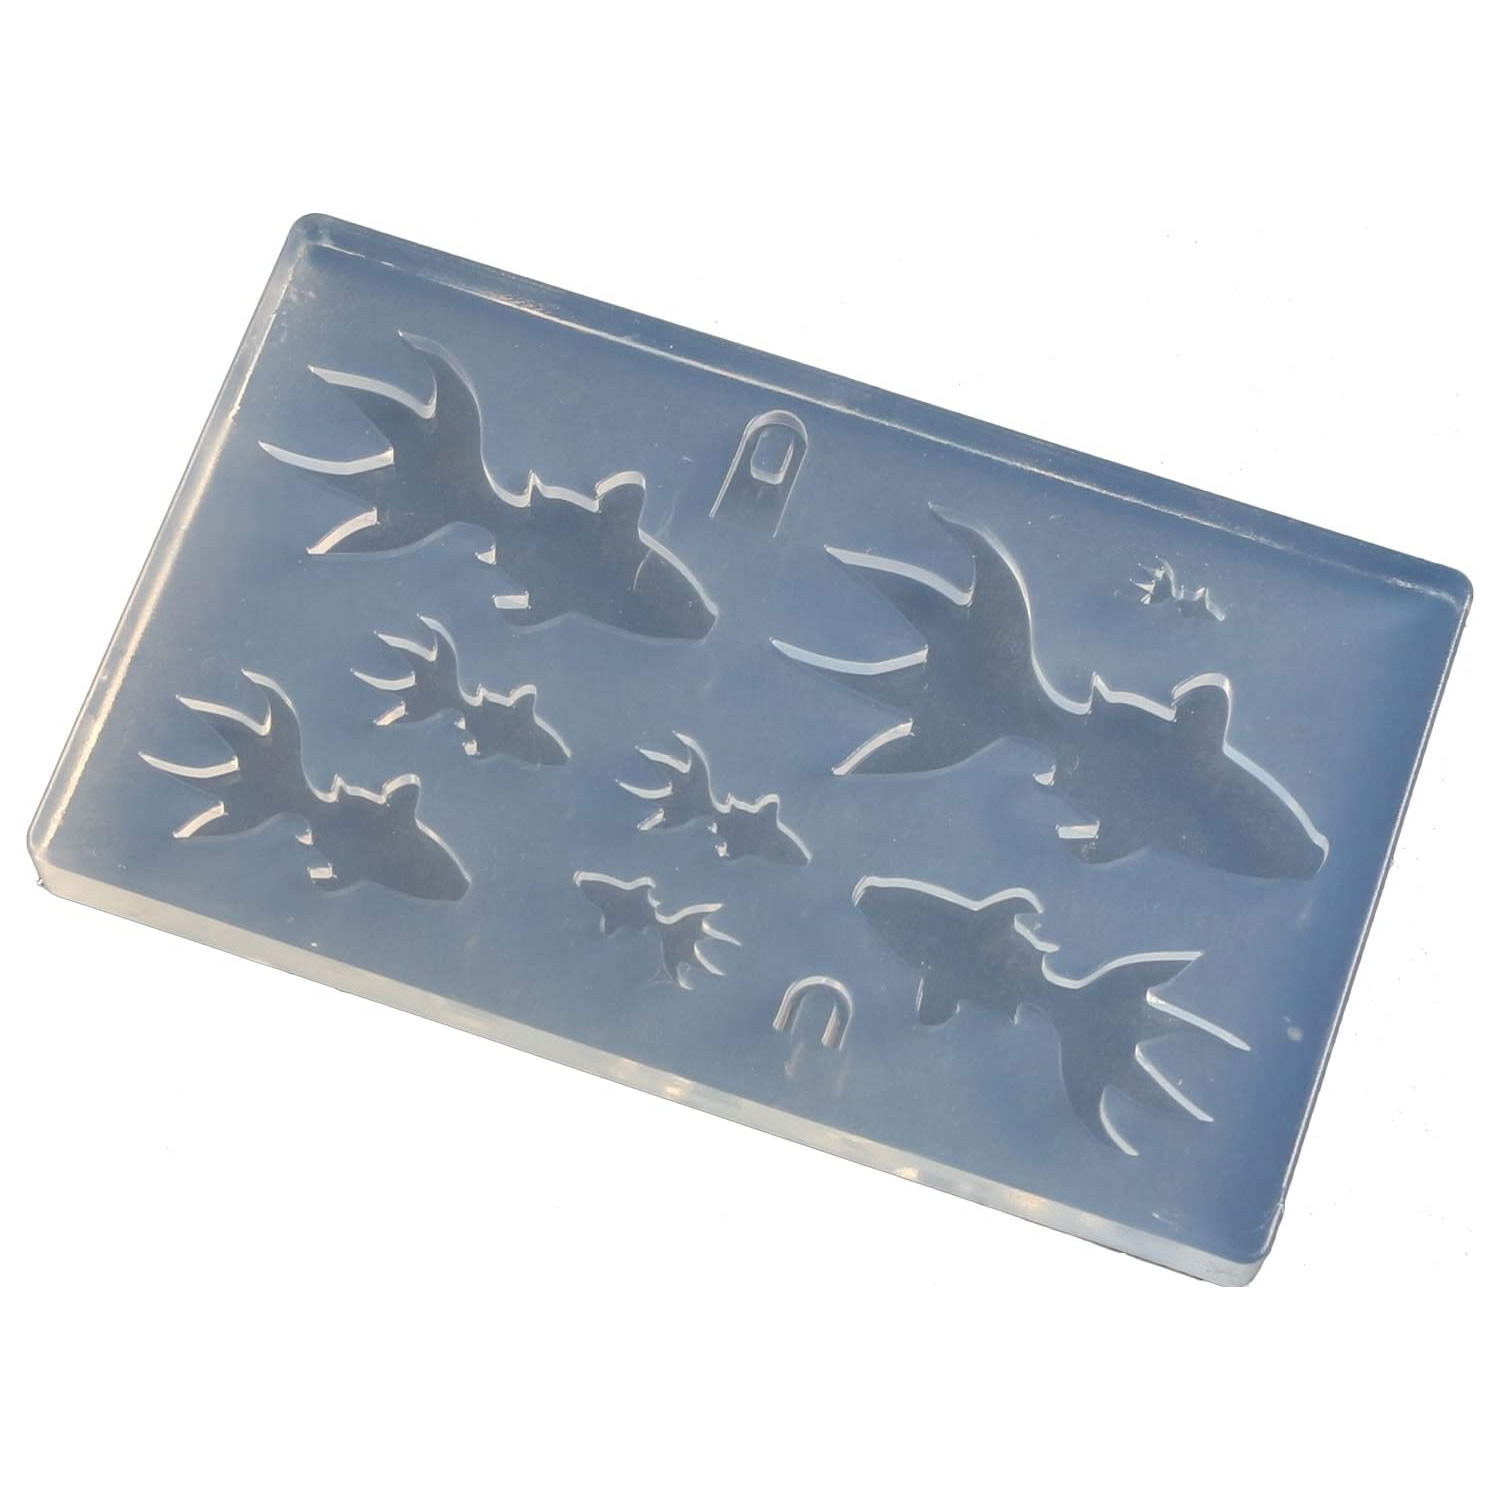 KAM-REJ-603  Resin Crafting Silicone Mold  (pcs)